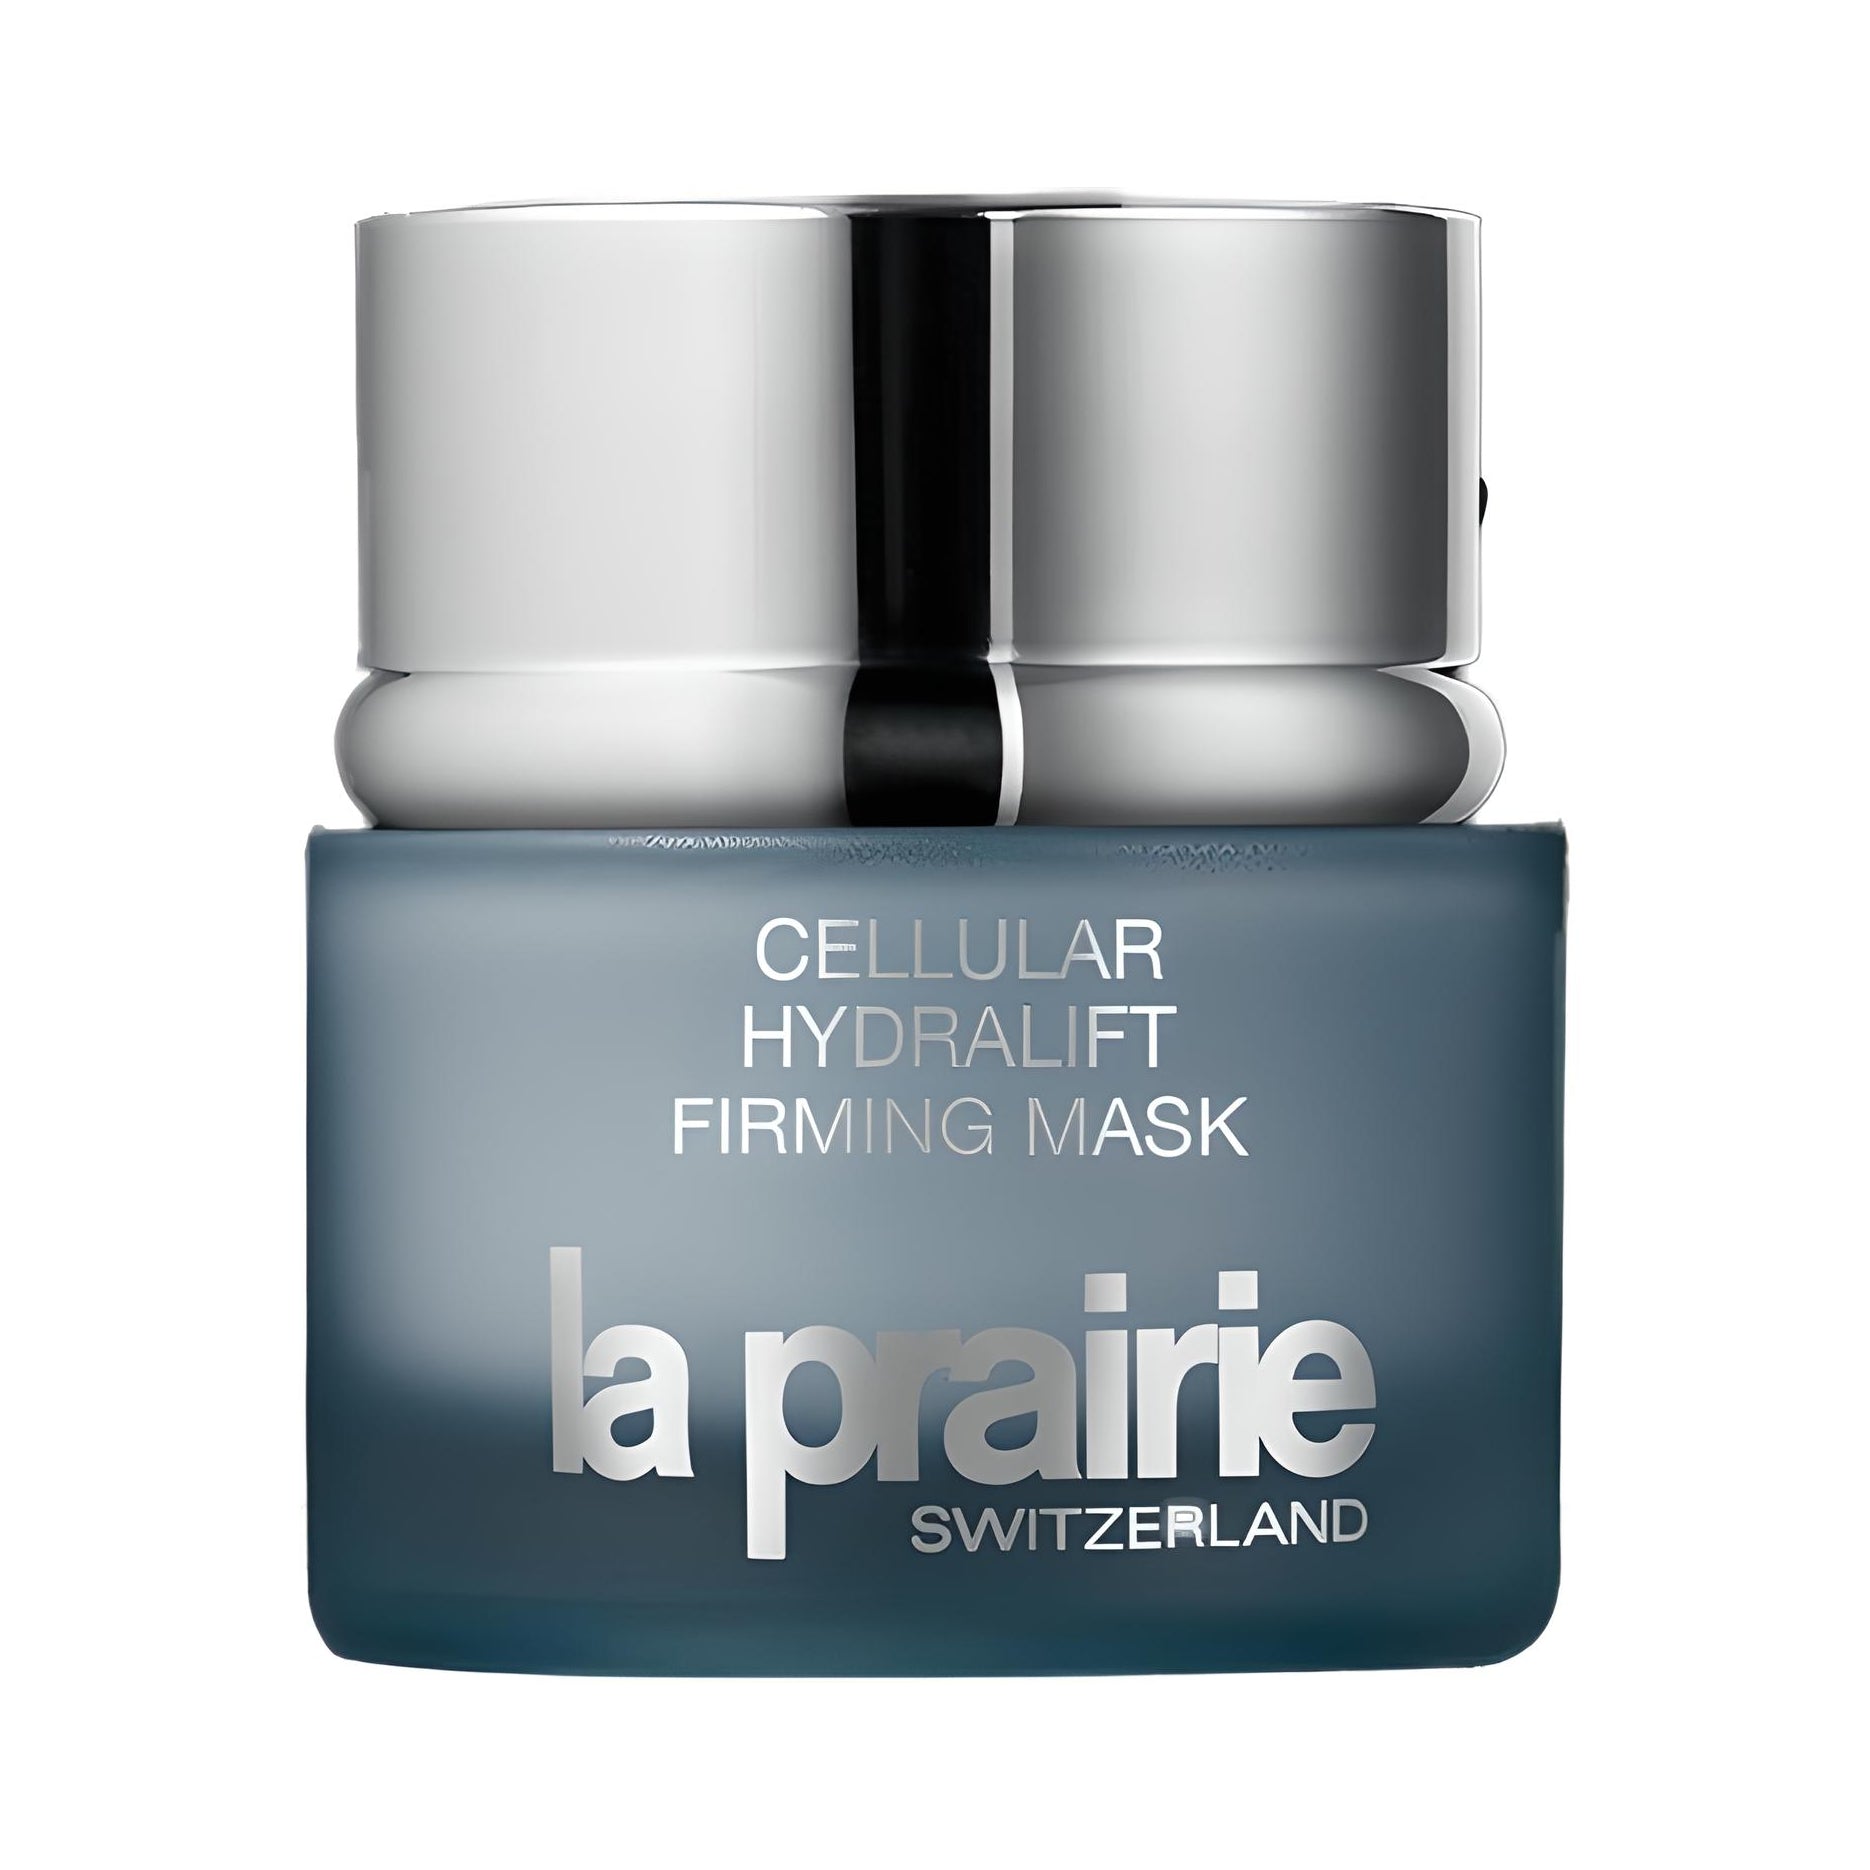 CELLULAR hydralift firming mask